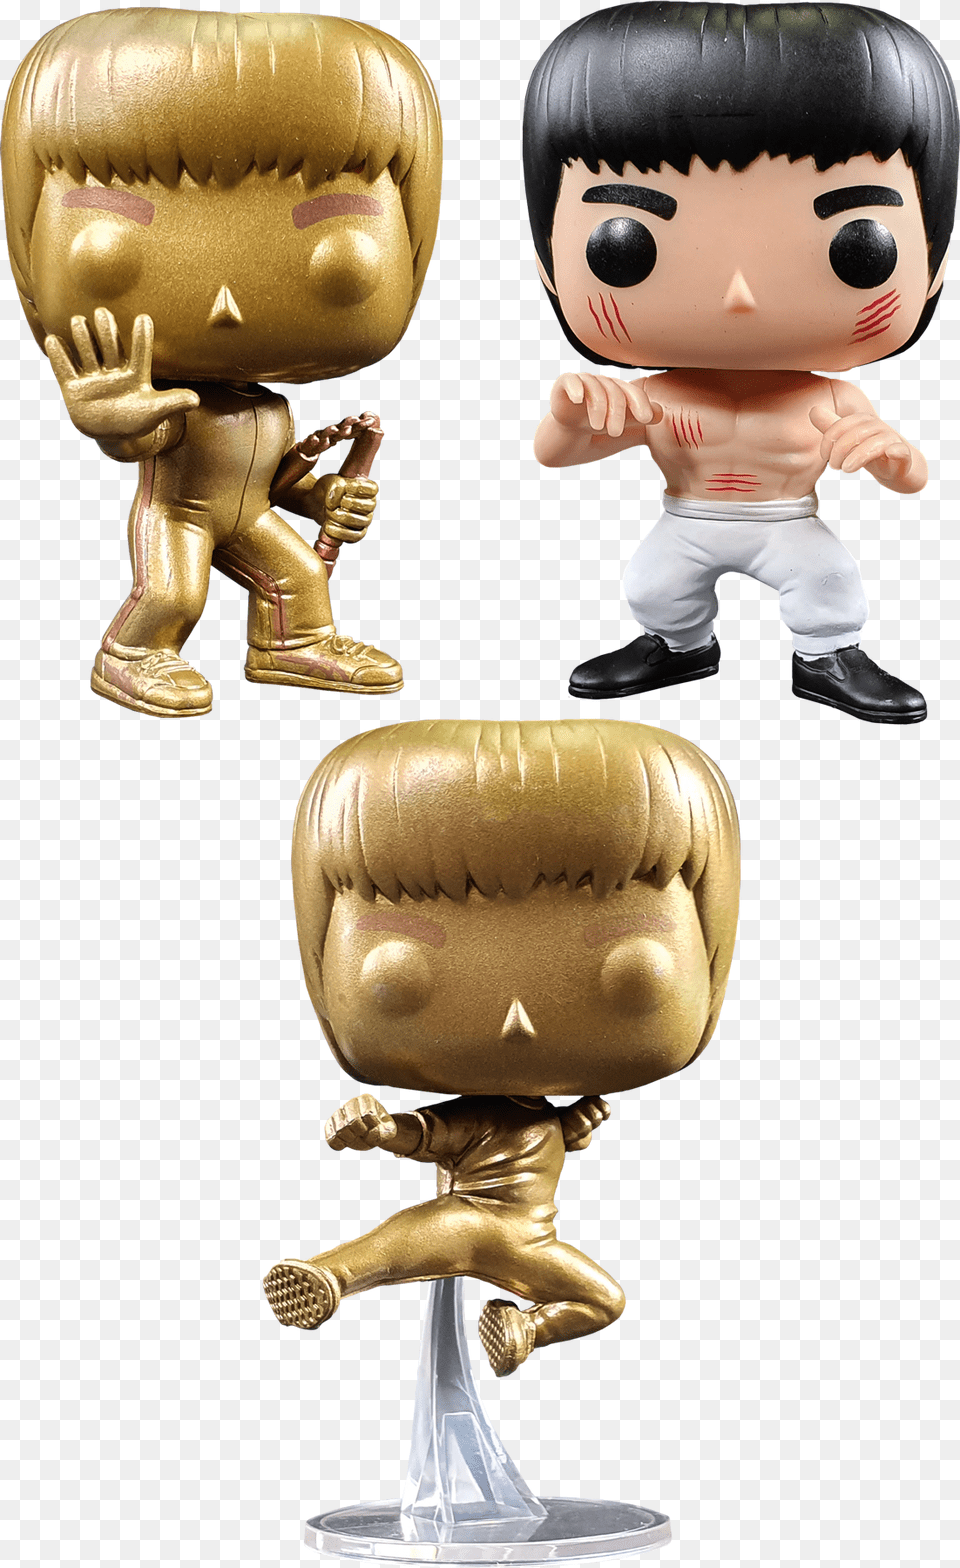 Bruce Lee Gold Pop Vinyl, Glass, Figurine, Toy, Doll Png